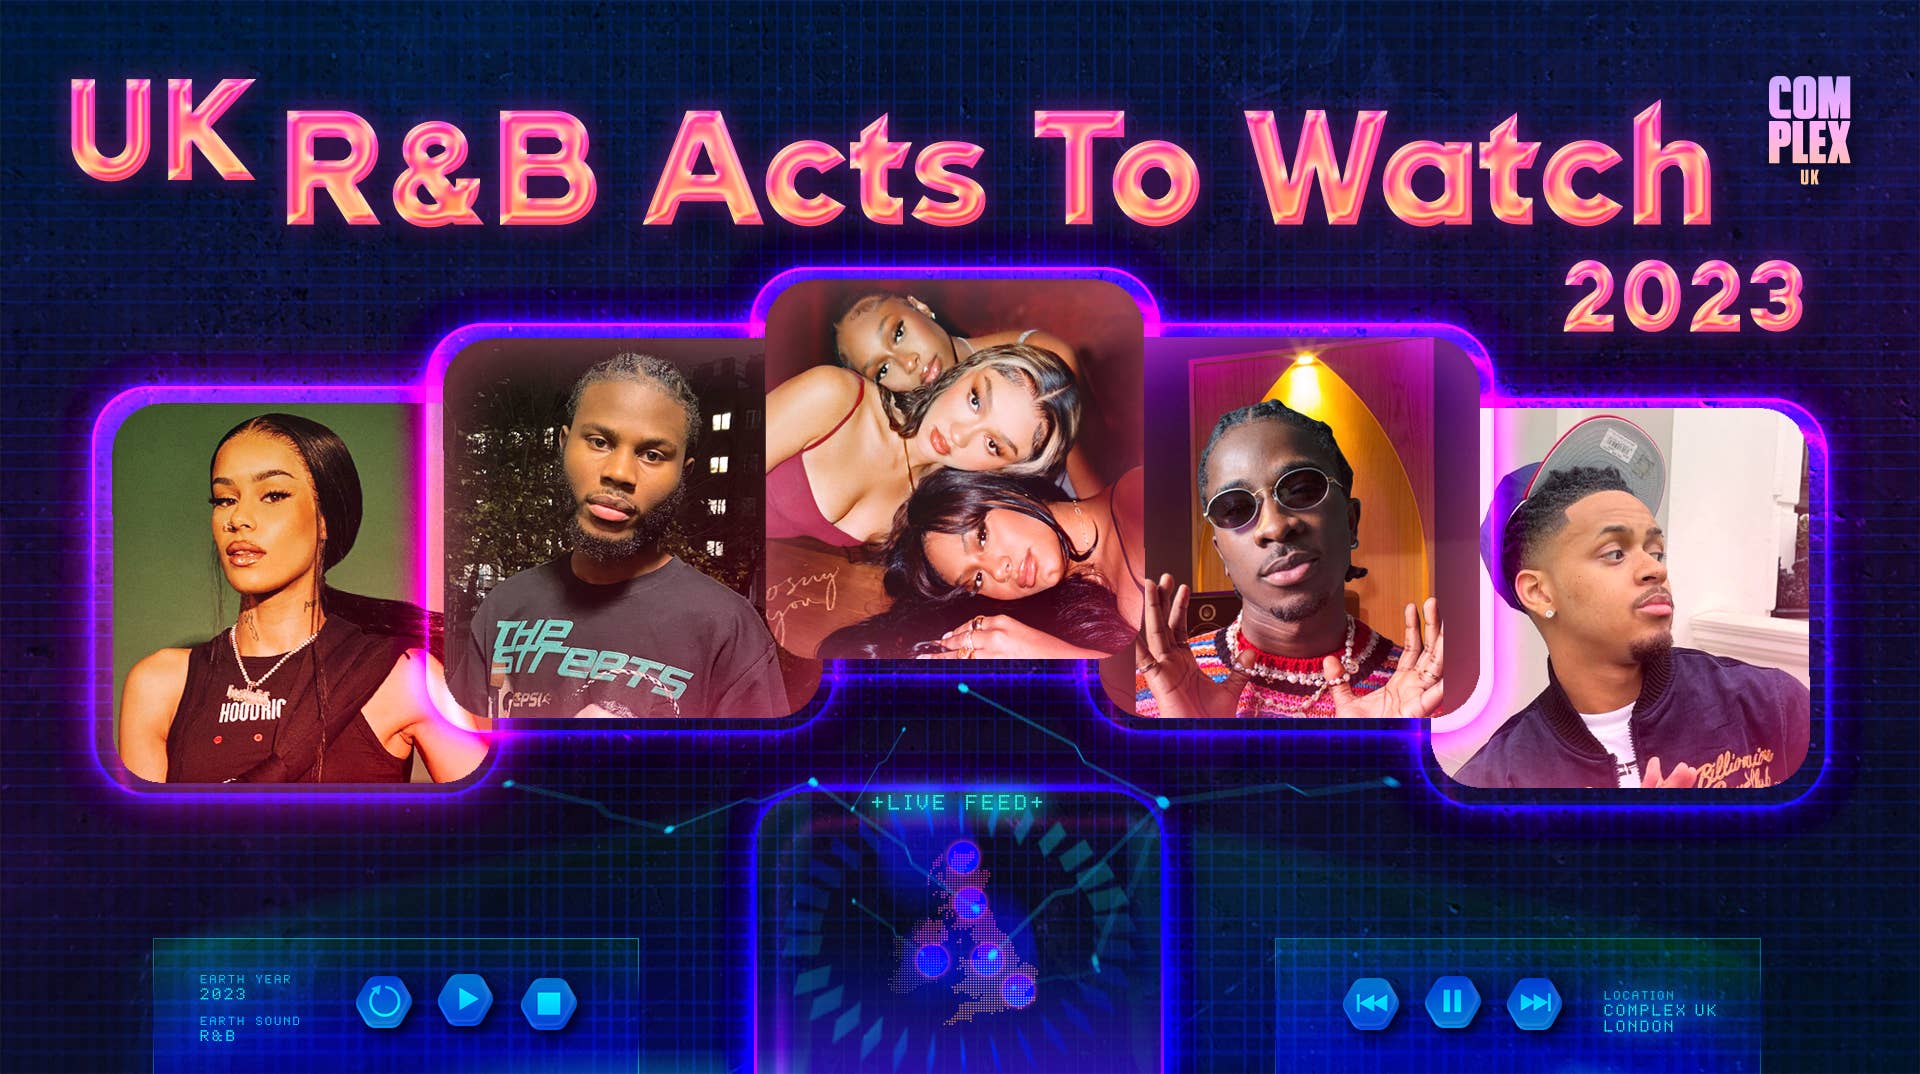 uk r and b artists to watch in 2023